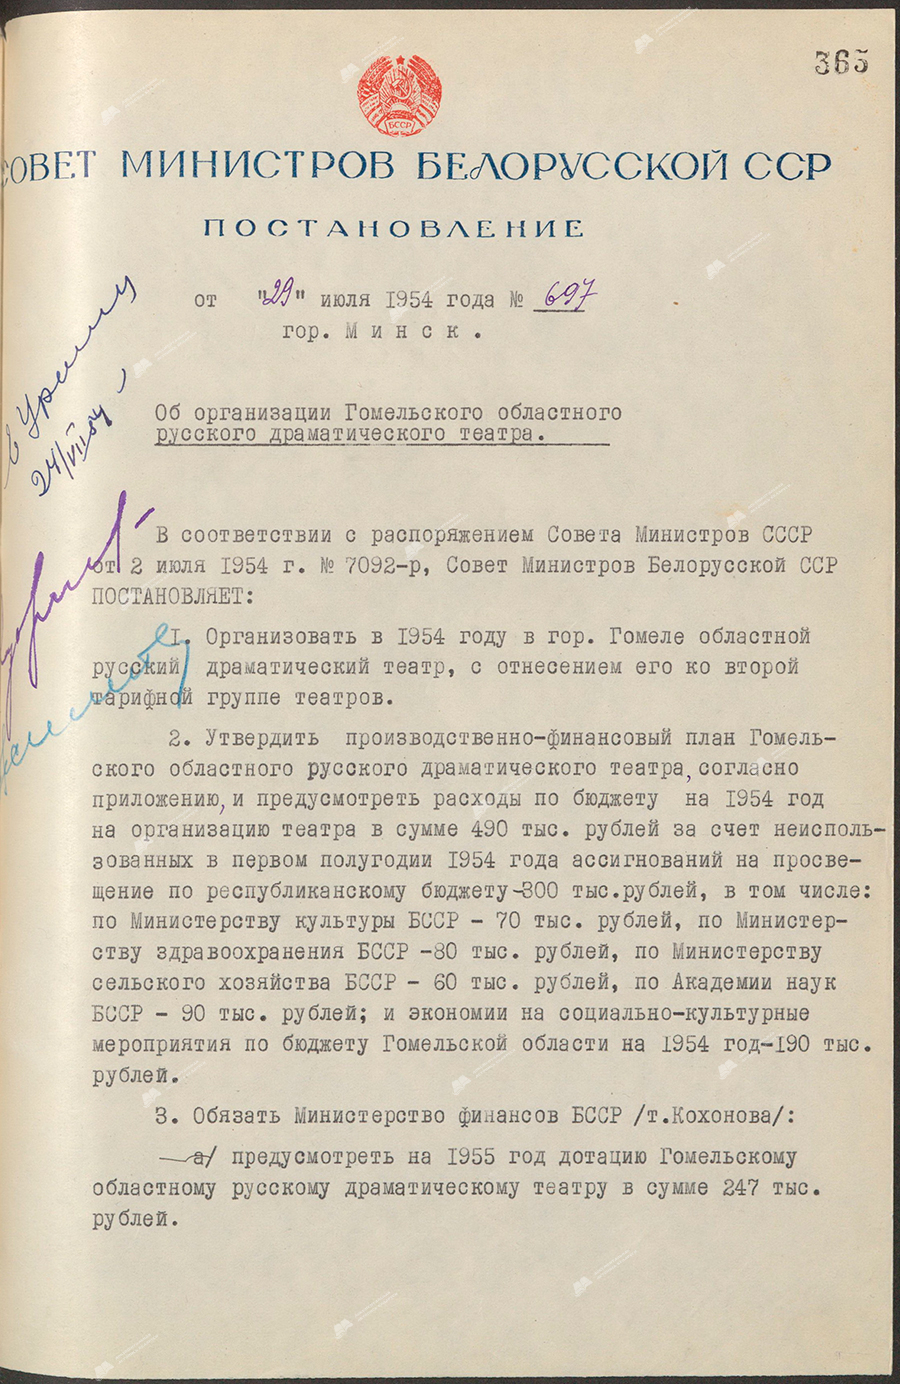 Resolution No. 697 of the Council of Ministers of the Byelorussian SSR «On the organization of the Gomel Regional Russian Drama Theater»-с. 0